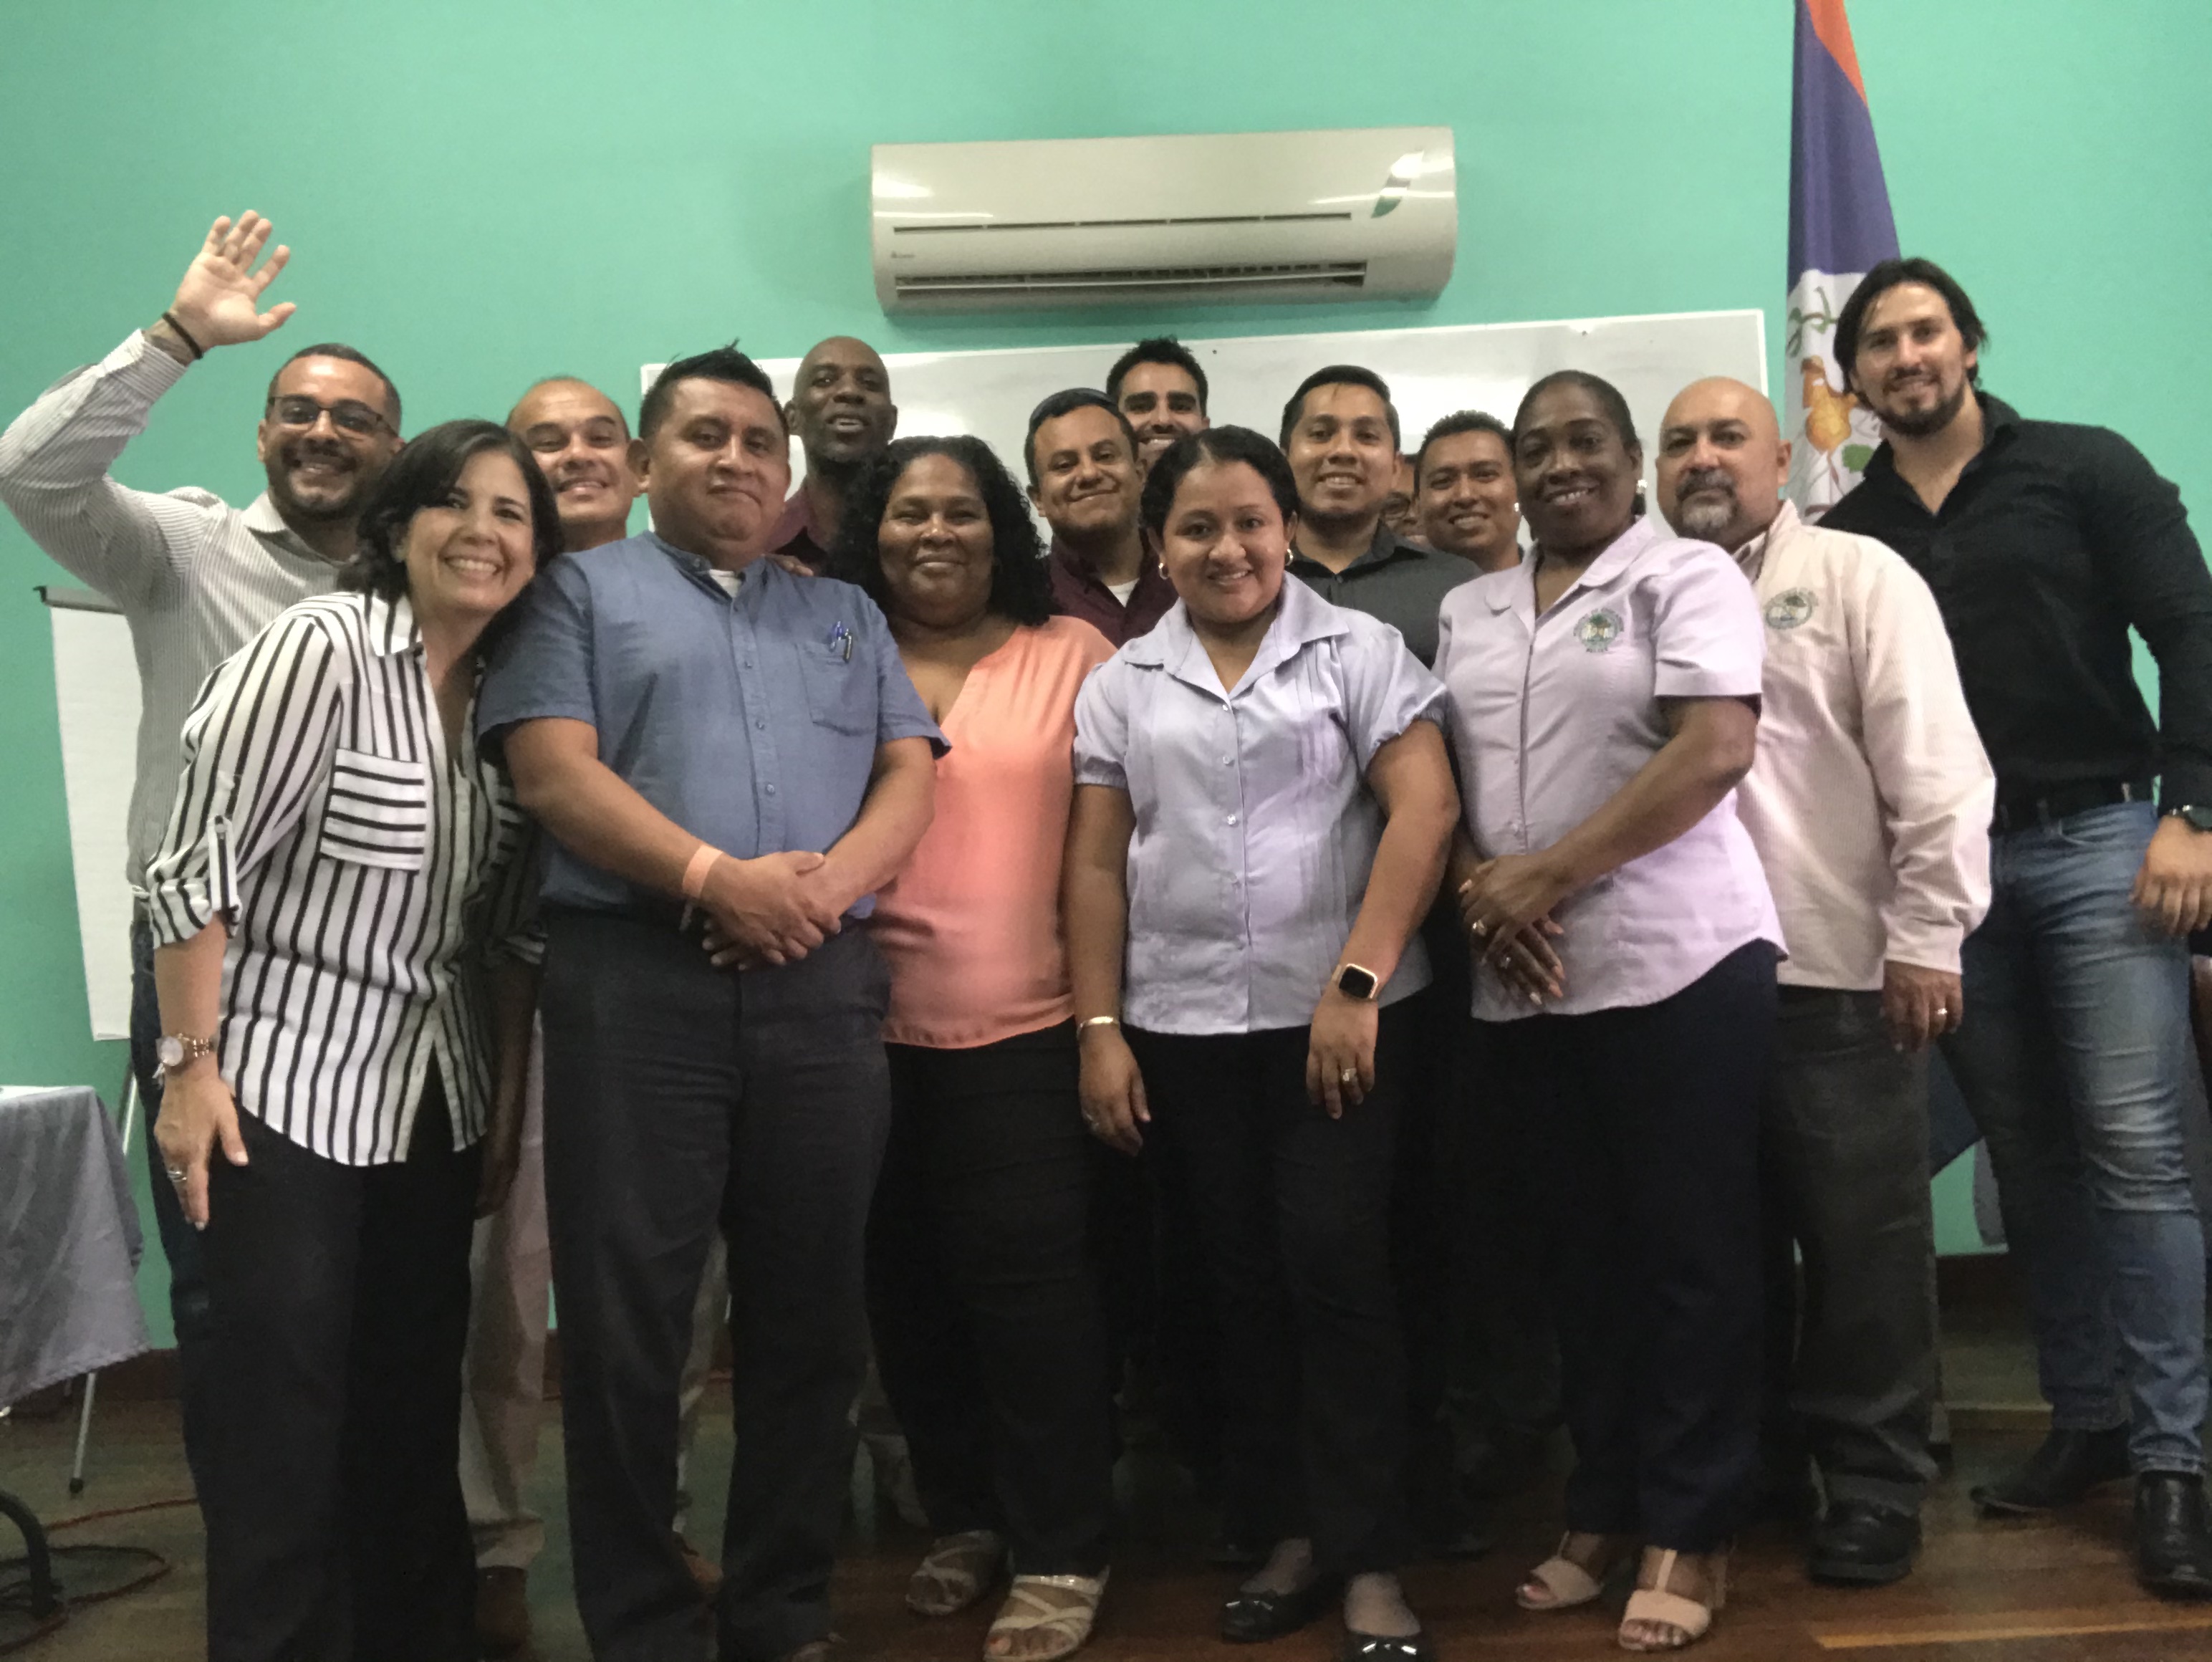 ProFuturo Program Officially Launched in Belize